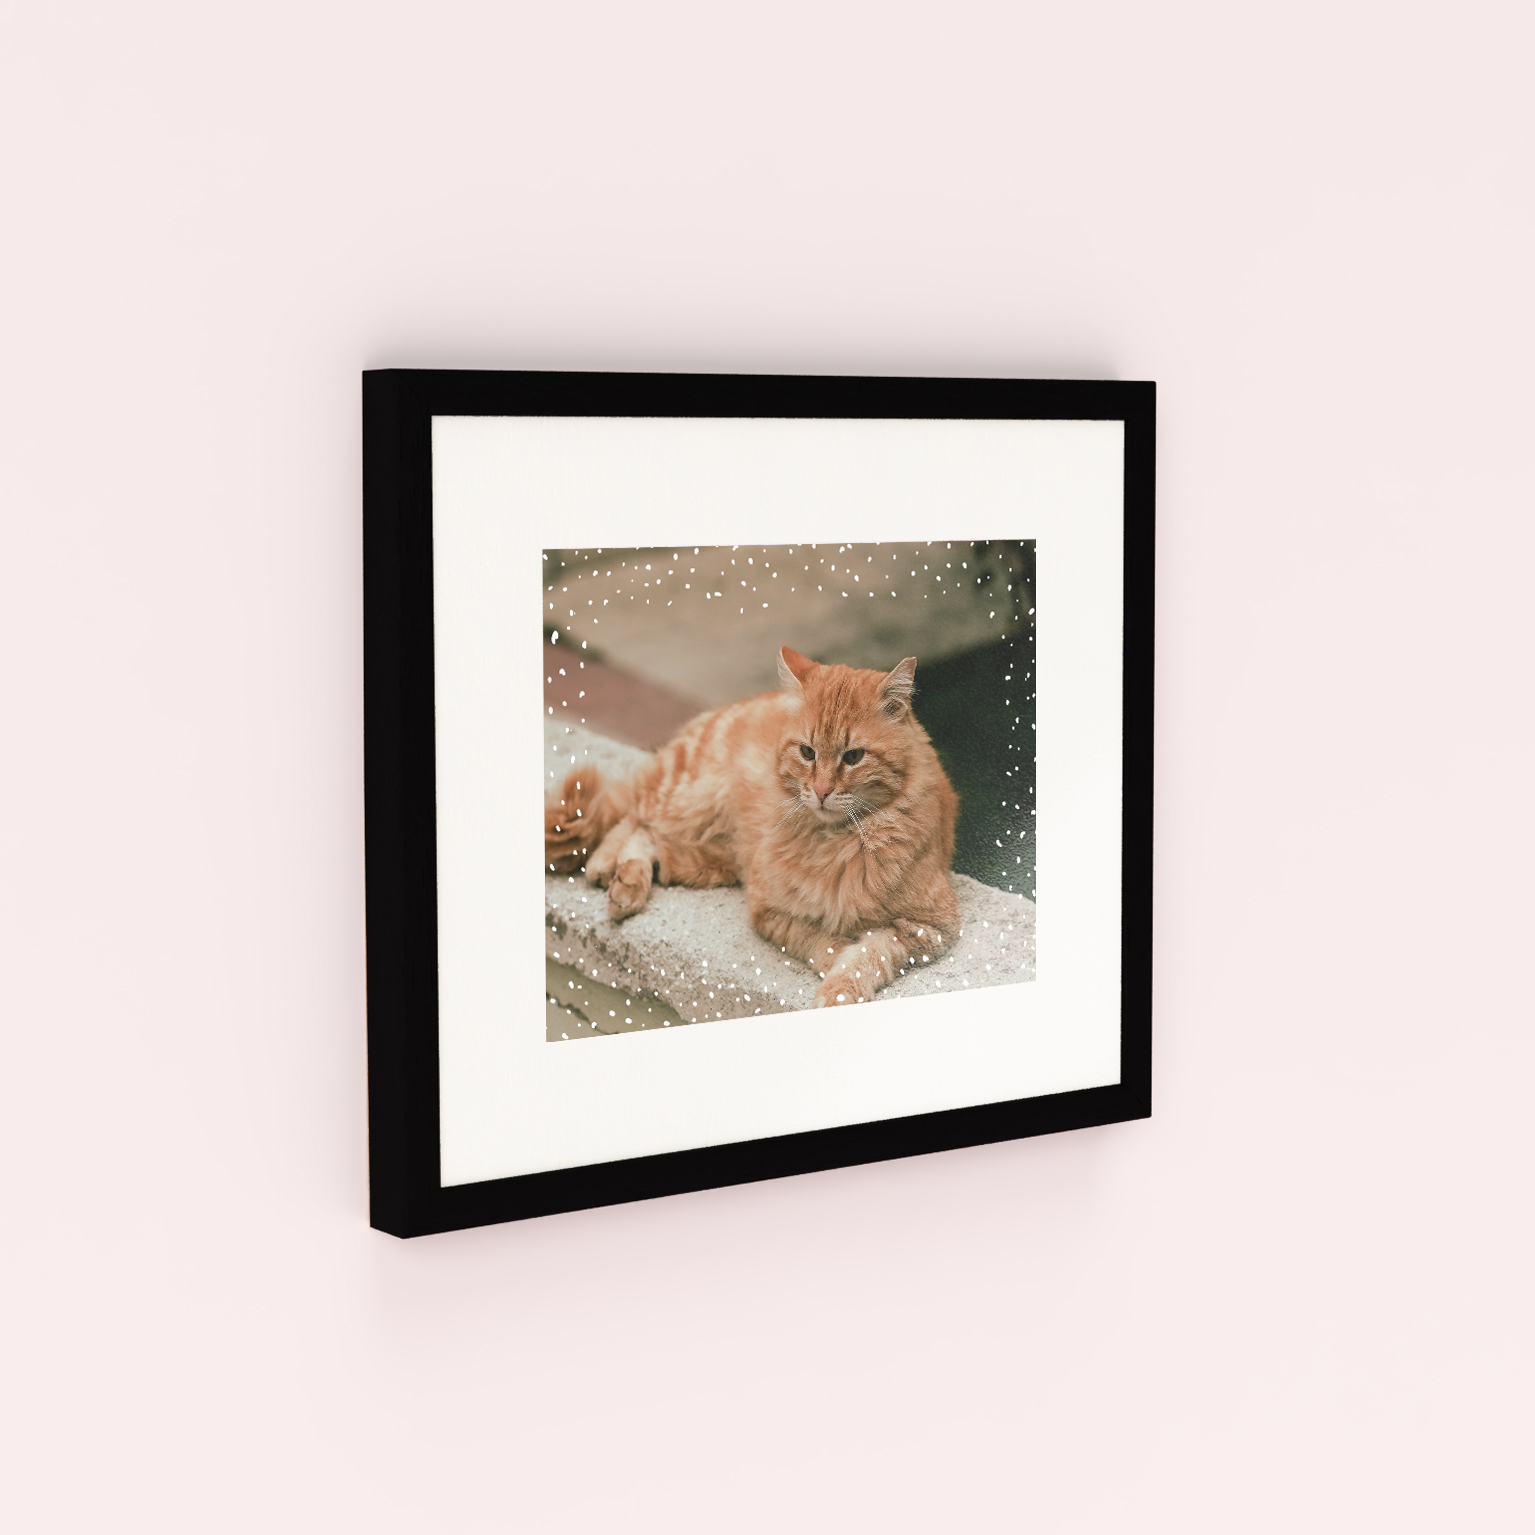 Dotted Framed Photo Print - Capture heartfelt moments with visual allure, a unique personalised keepsake.